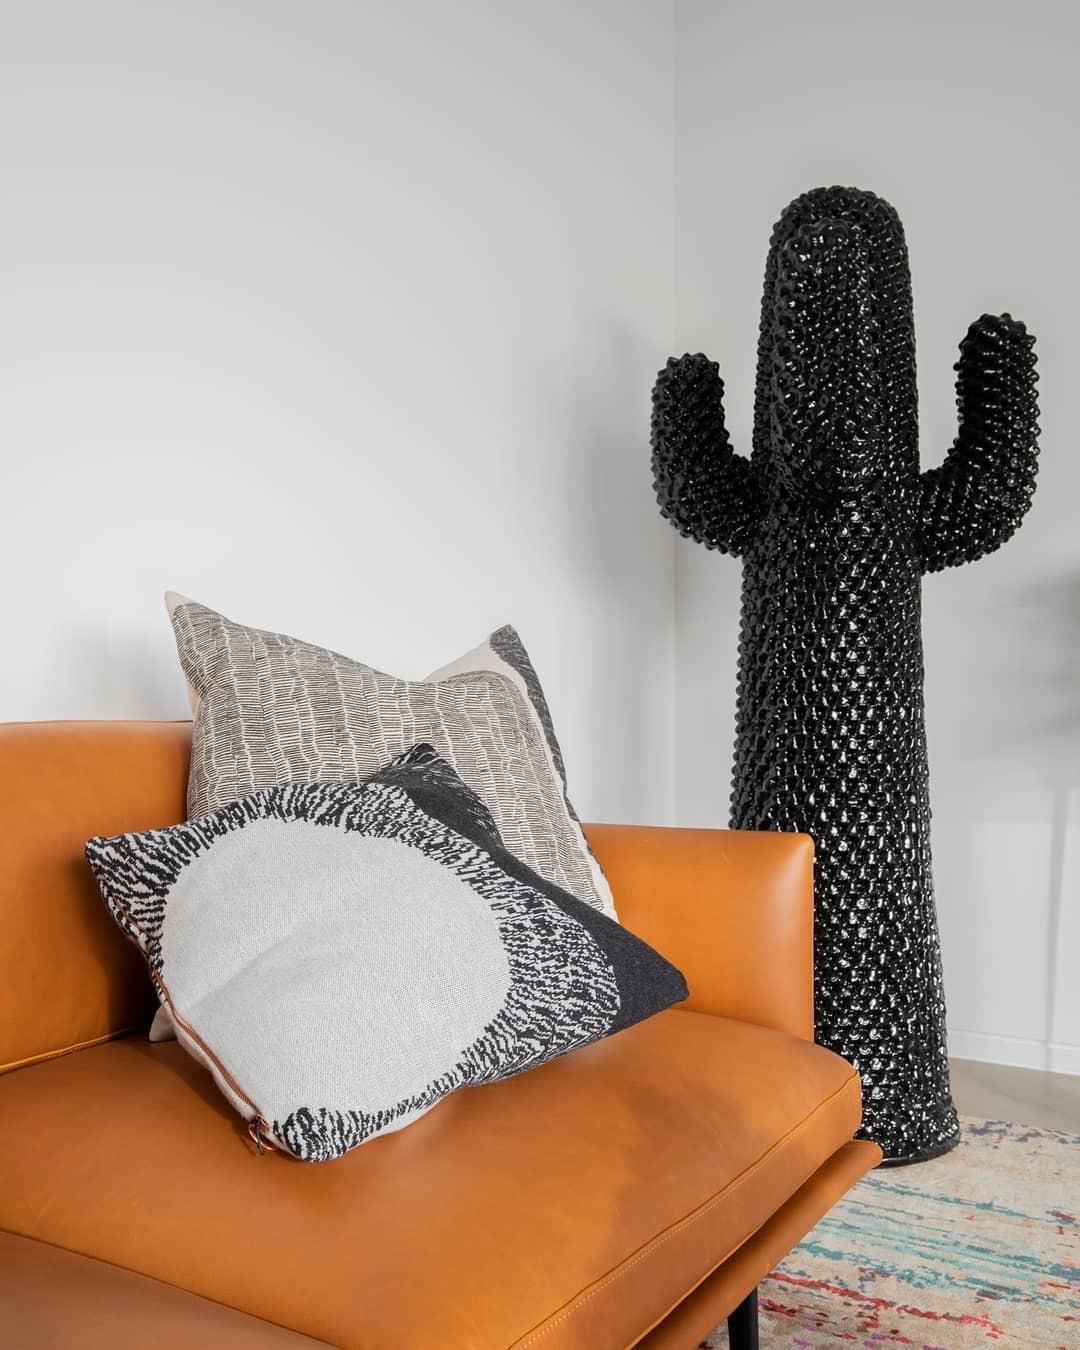 Born in 1972, the cactus coat rack has questioned the static and rigid world of interior design since its inception, revolutionizing the traditional furniture landscape. Designed by Guido Drocco and Franco Mello, Cactus Coat Rack is supposed to be a